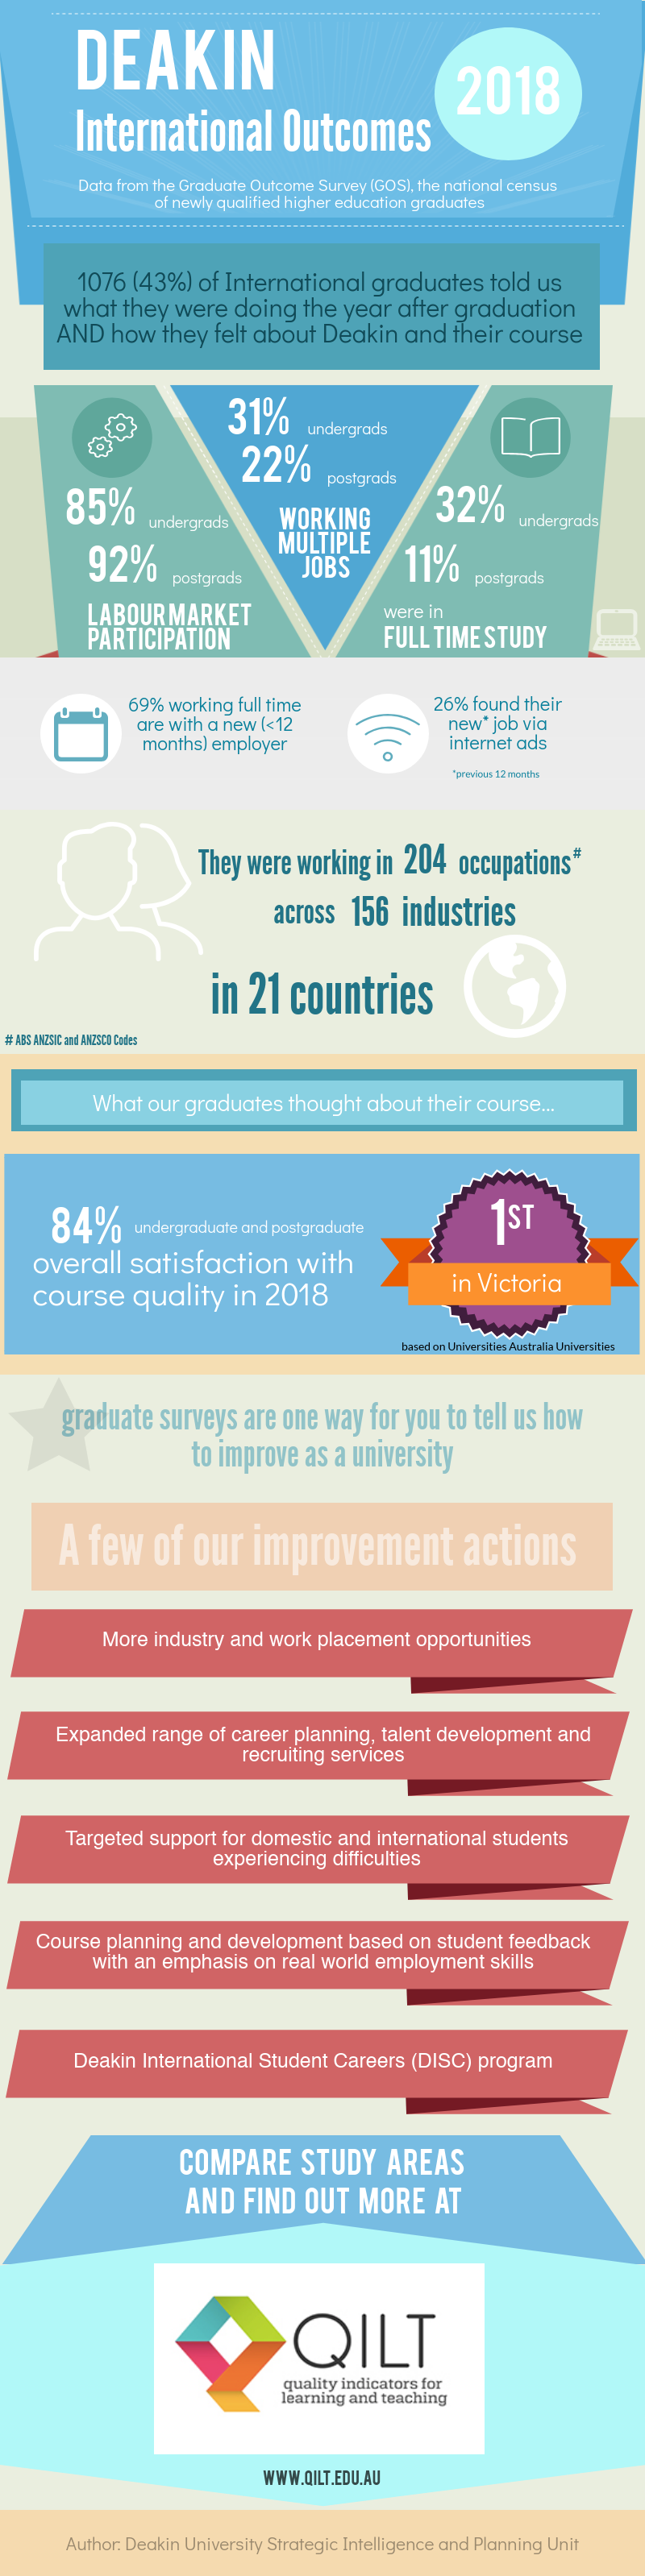 Infographic of the international outcomes 2018, see second tab for text version